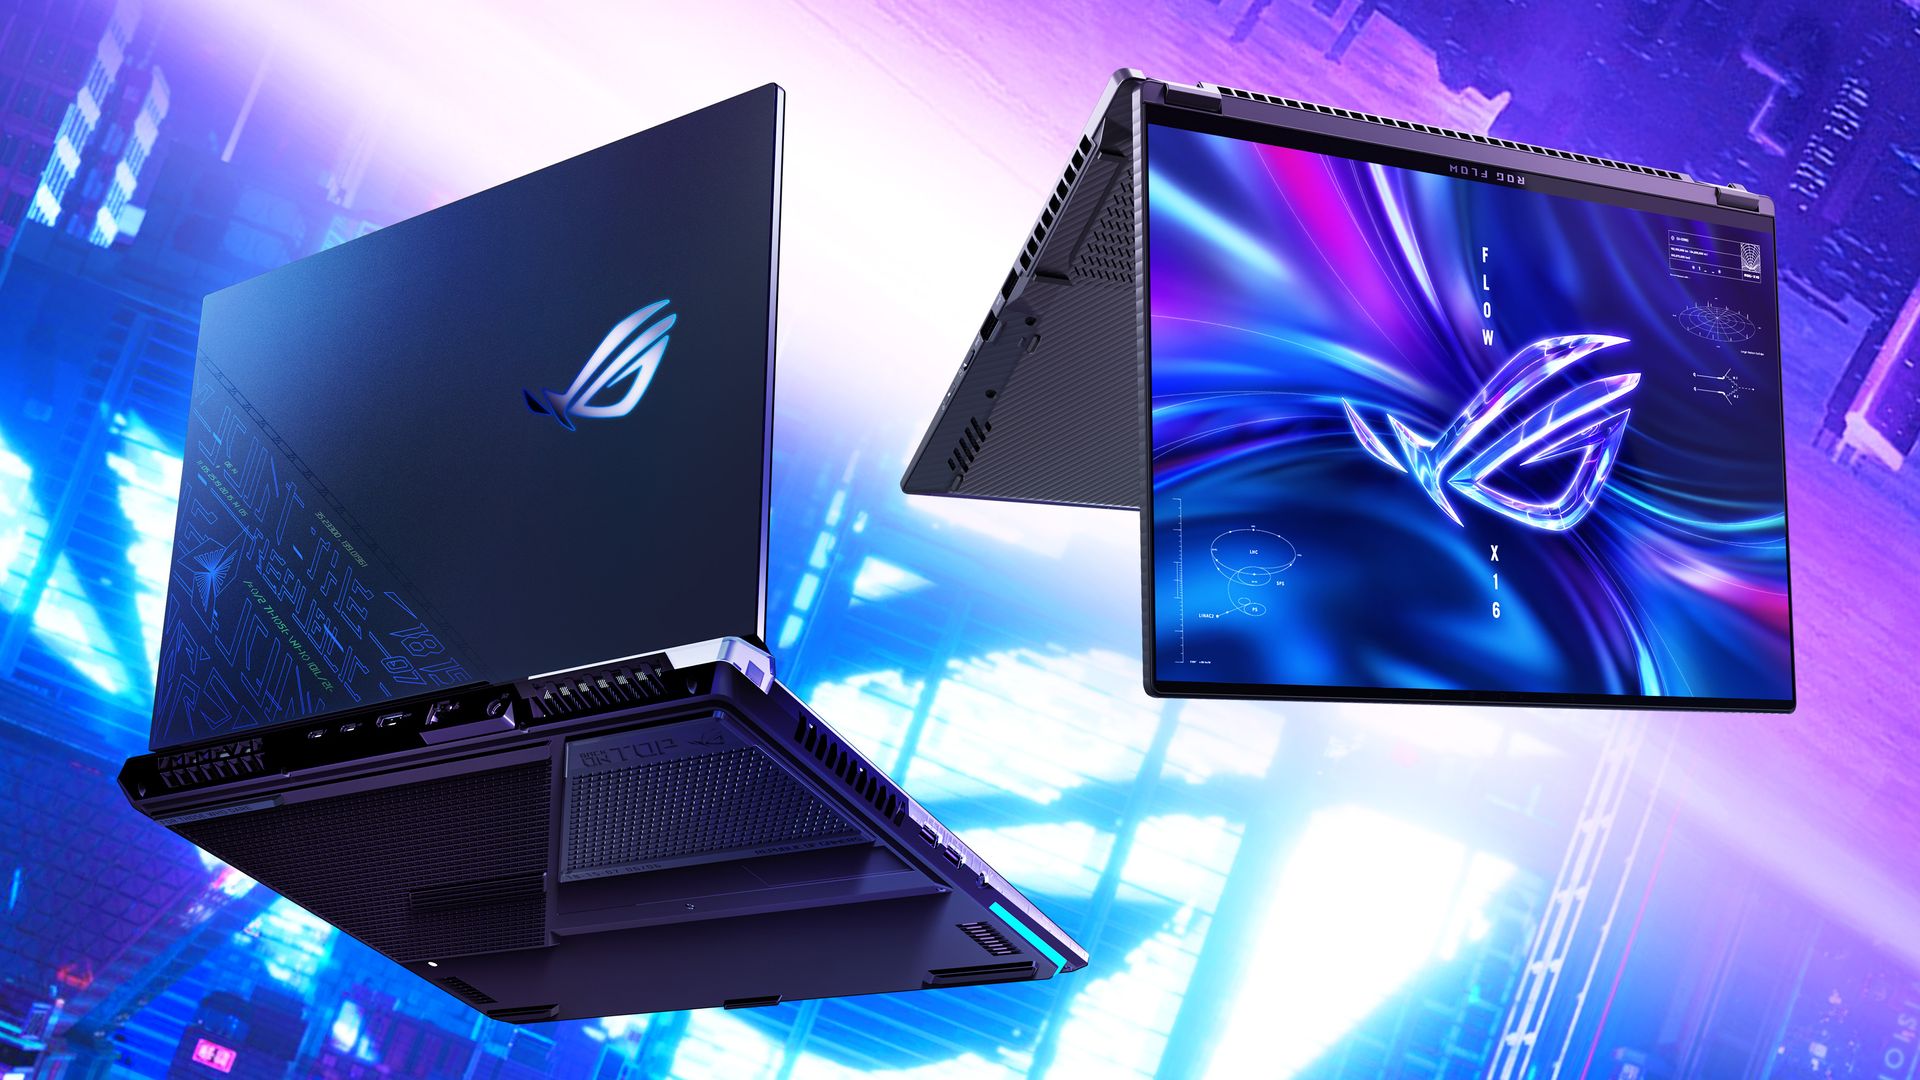 01 ROG launches 2 new gaming laptops at For Those Who Dare Boundless virtual event